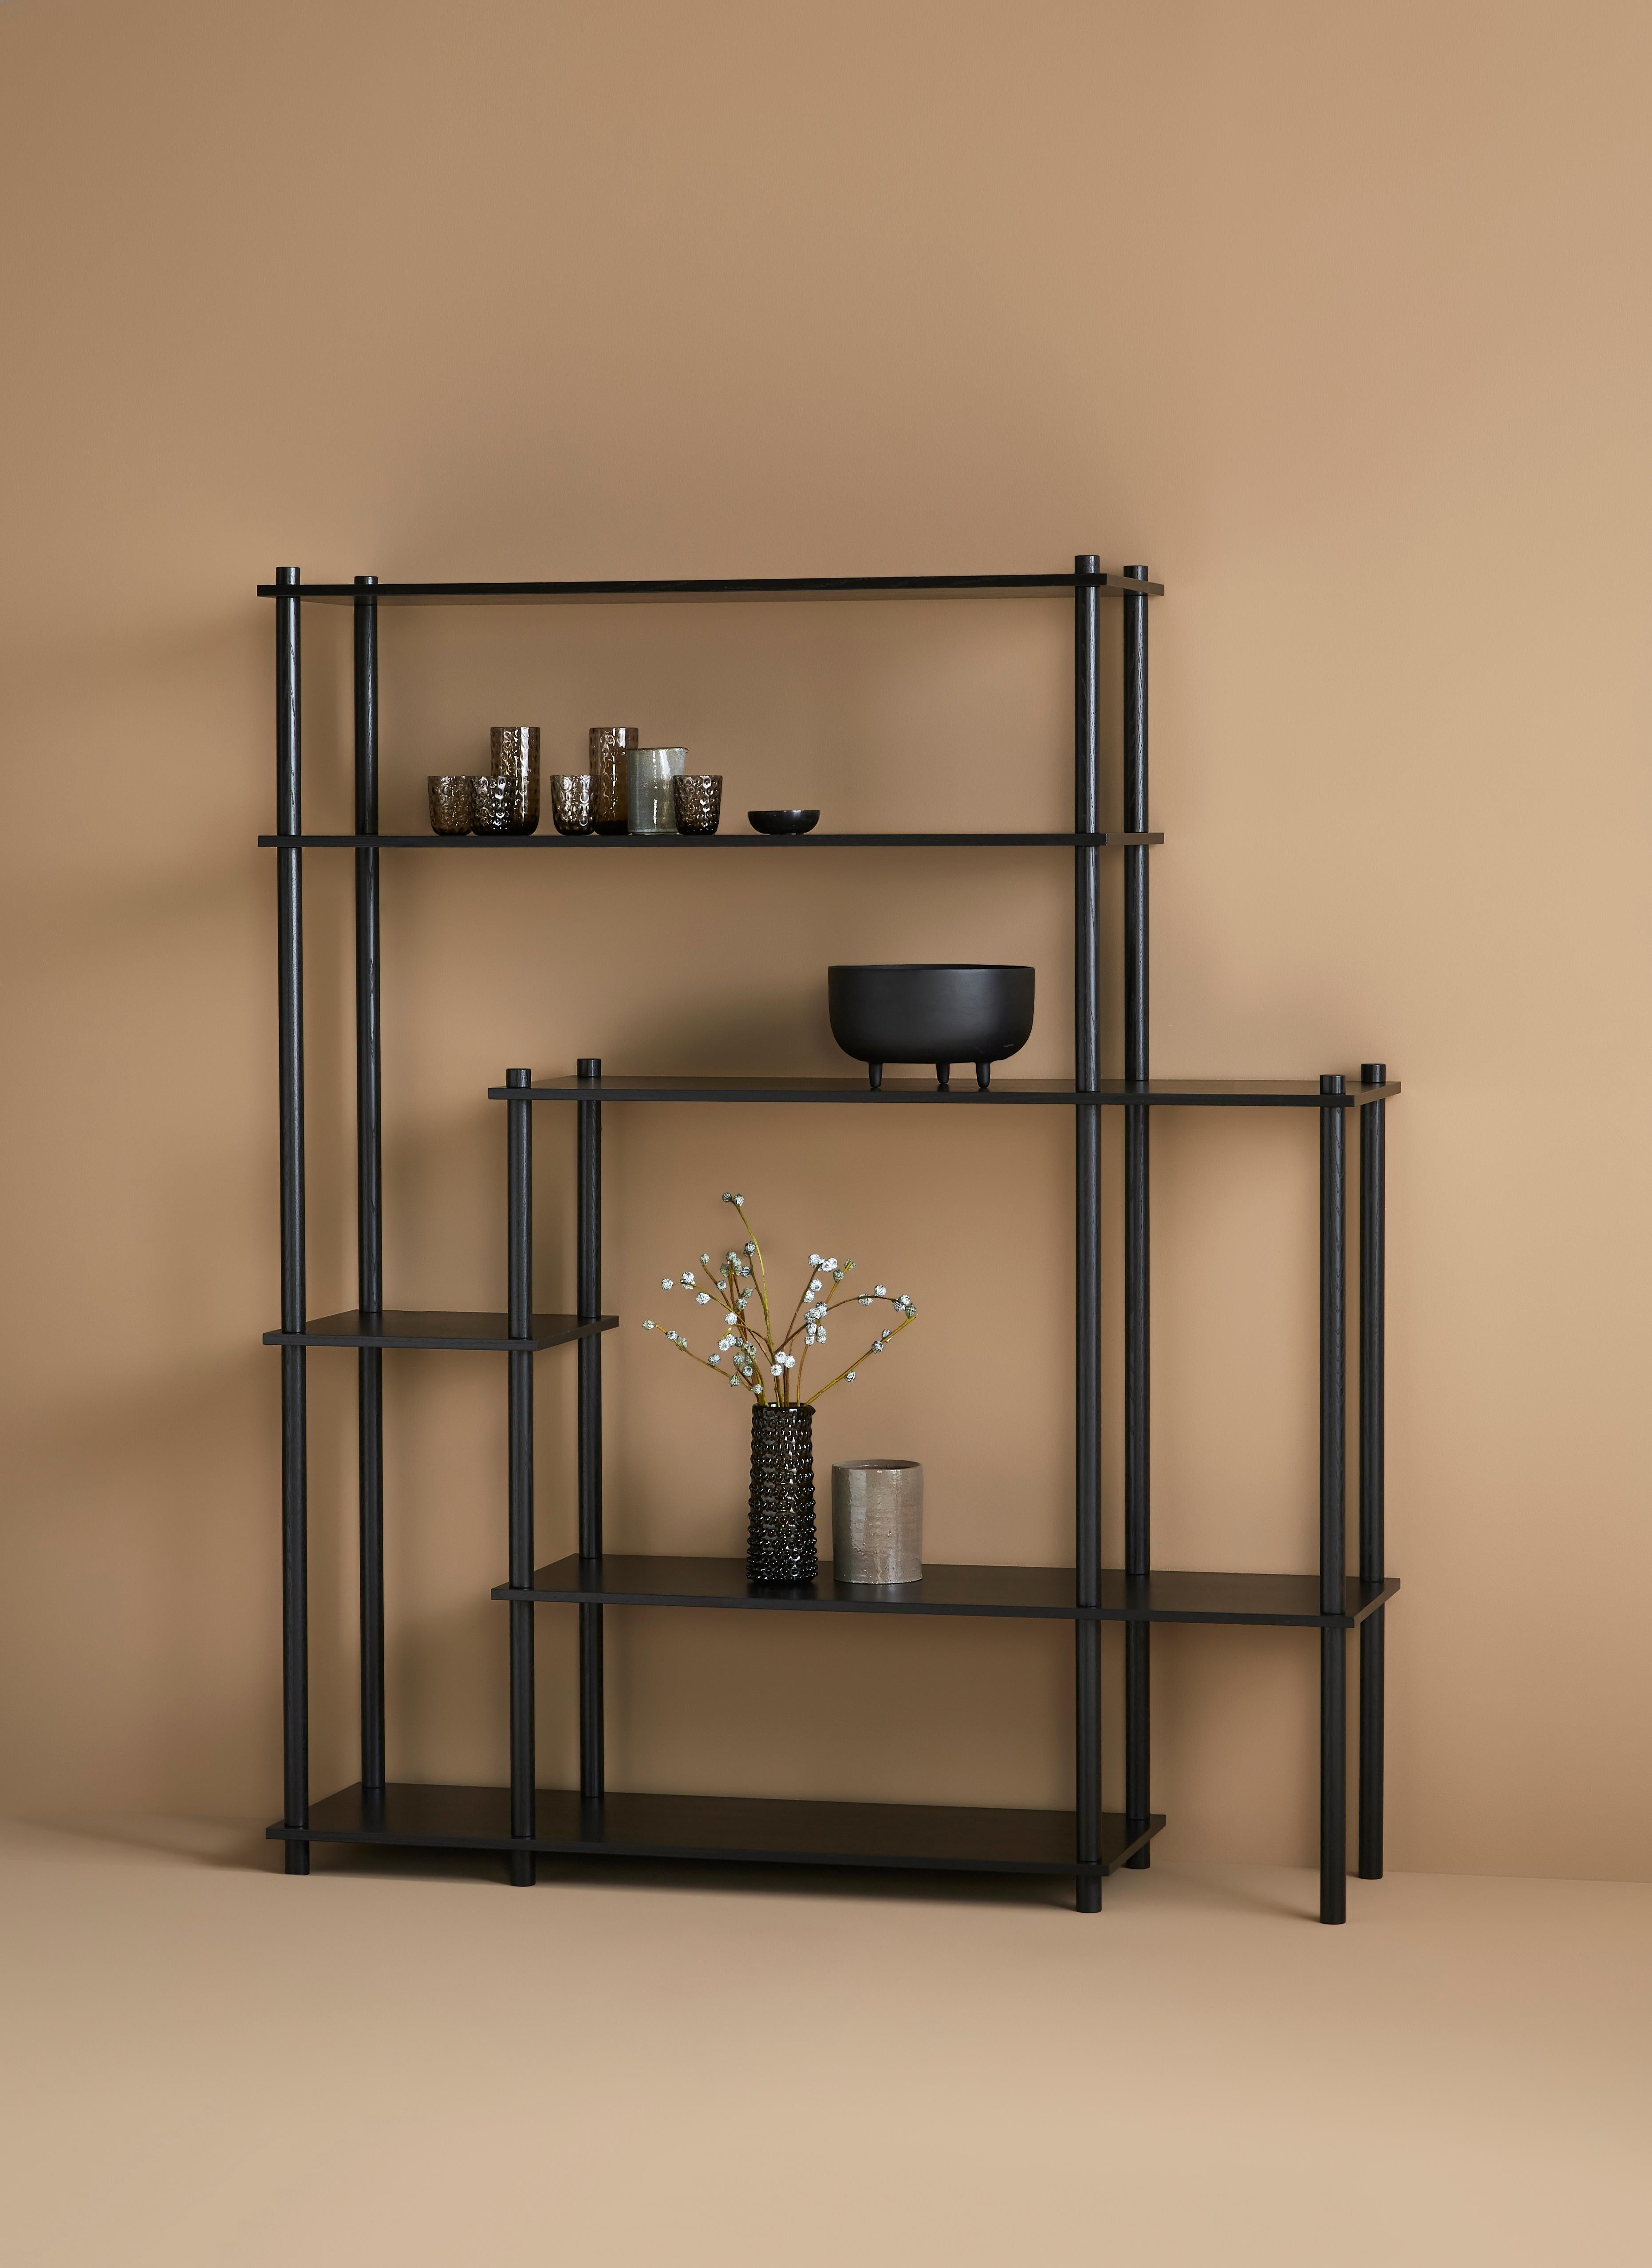 Black oak elevate shelving XI by Camilla Akersveen and Christopher Konings.
Materials: metal, oak.
Dimensions: D 40 x W 153.2 x H 182.6 cm
Available in matt lacquered oak or black oak. Different shelving sistems available.

Camilla Akersveen